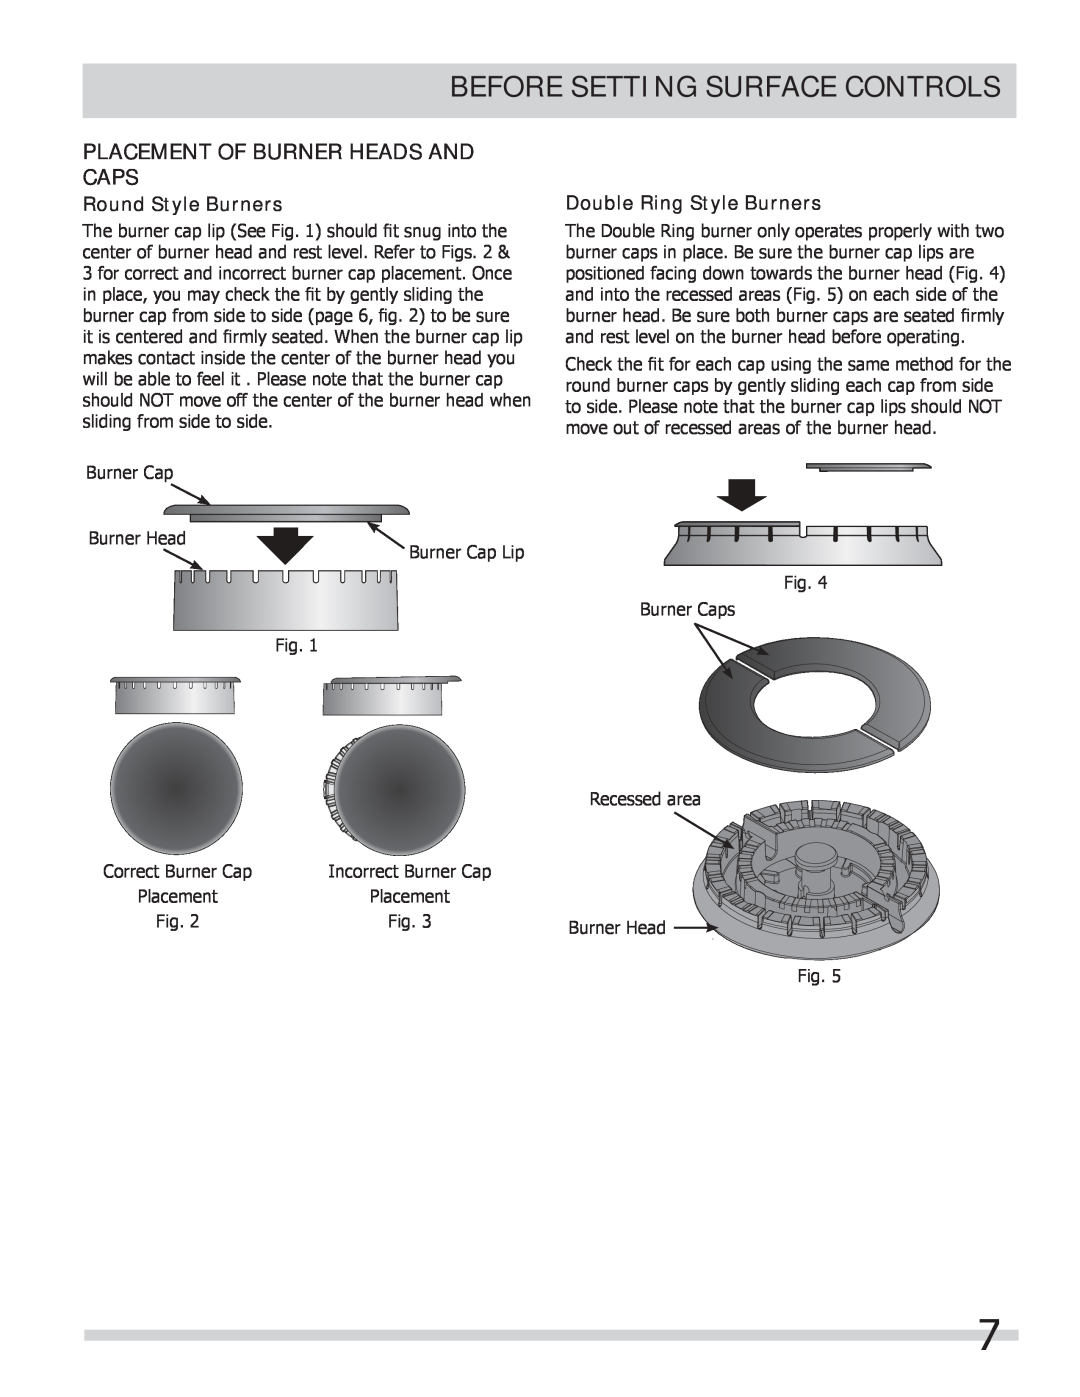 Frigidaire FPGC3087MS Round Style Burners, Double Ring Style Burners, Before Setting Surface Controls 